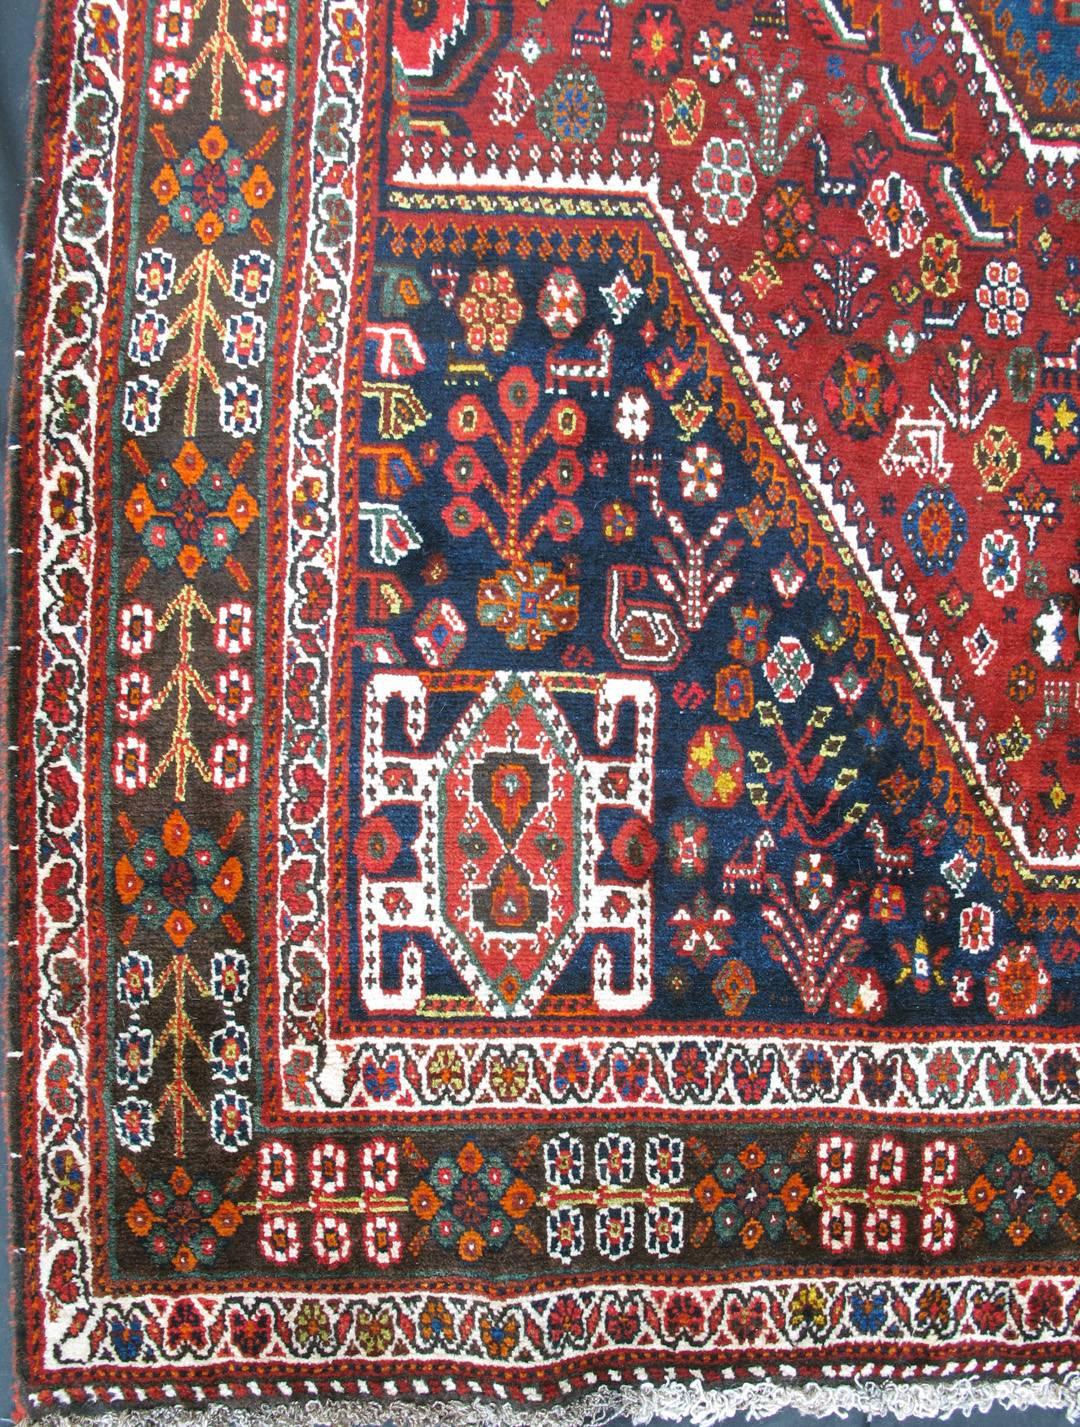 This multi-colored Persian rug features an all-over background and a central medallion with red, blue, brown , yellow, green and peach colors.
Measures: 5.7 x 8.